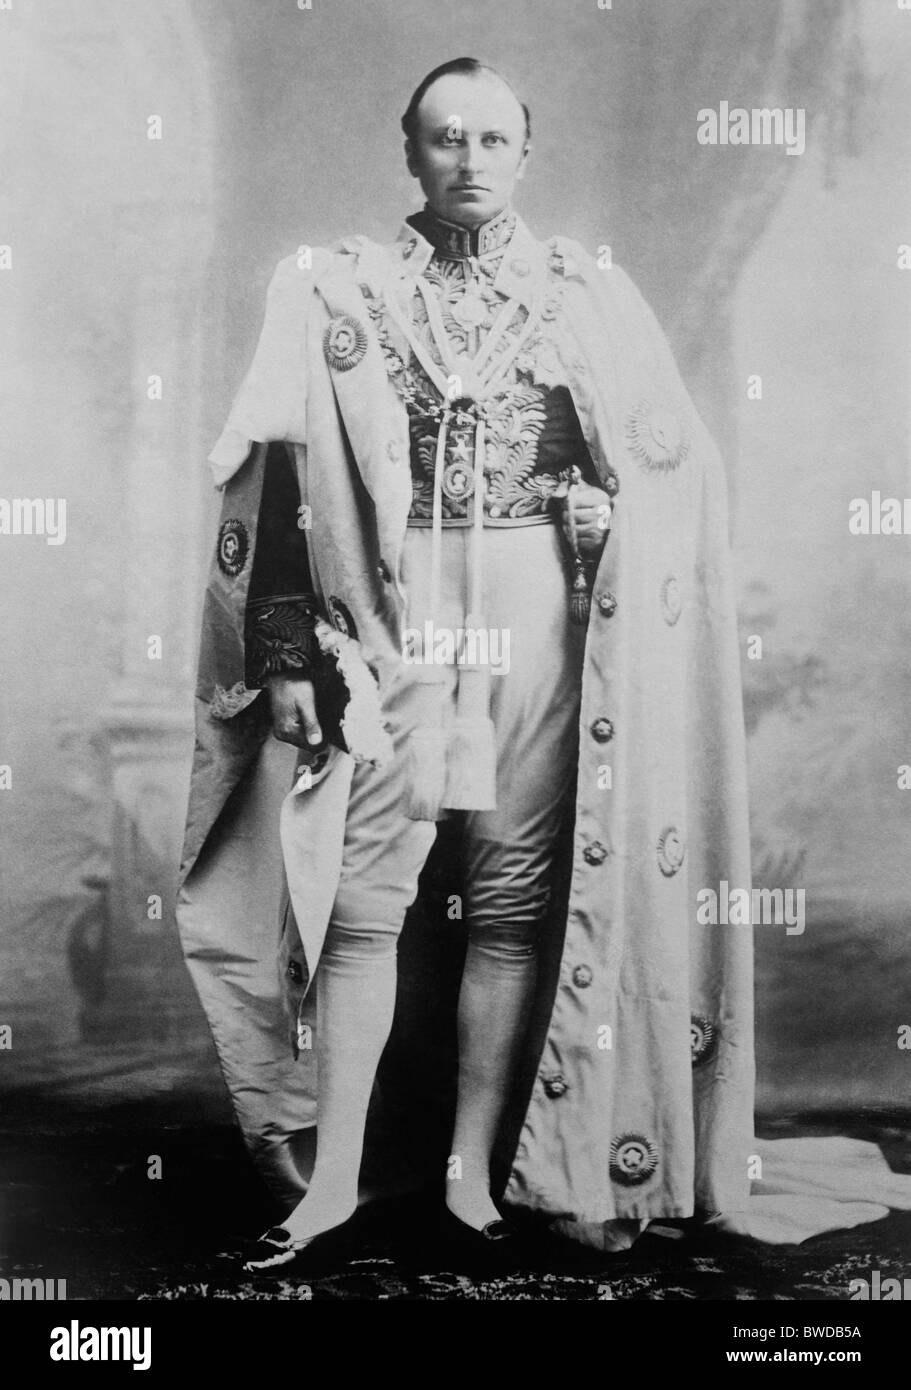 Vintage portrait photo c1900 of Lord Curzon (George Curzon, 1st Marquess Curzon of Kedleston) as Viceroy of India (1899 - 1905). Stock Photo